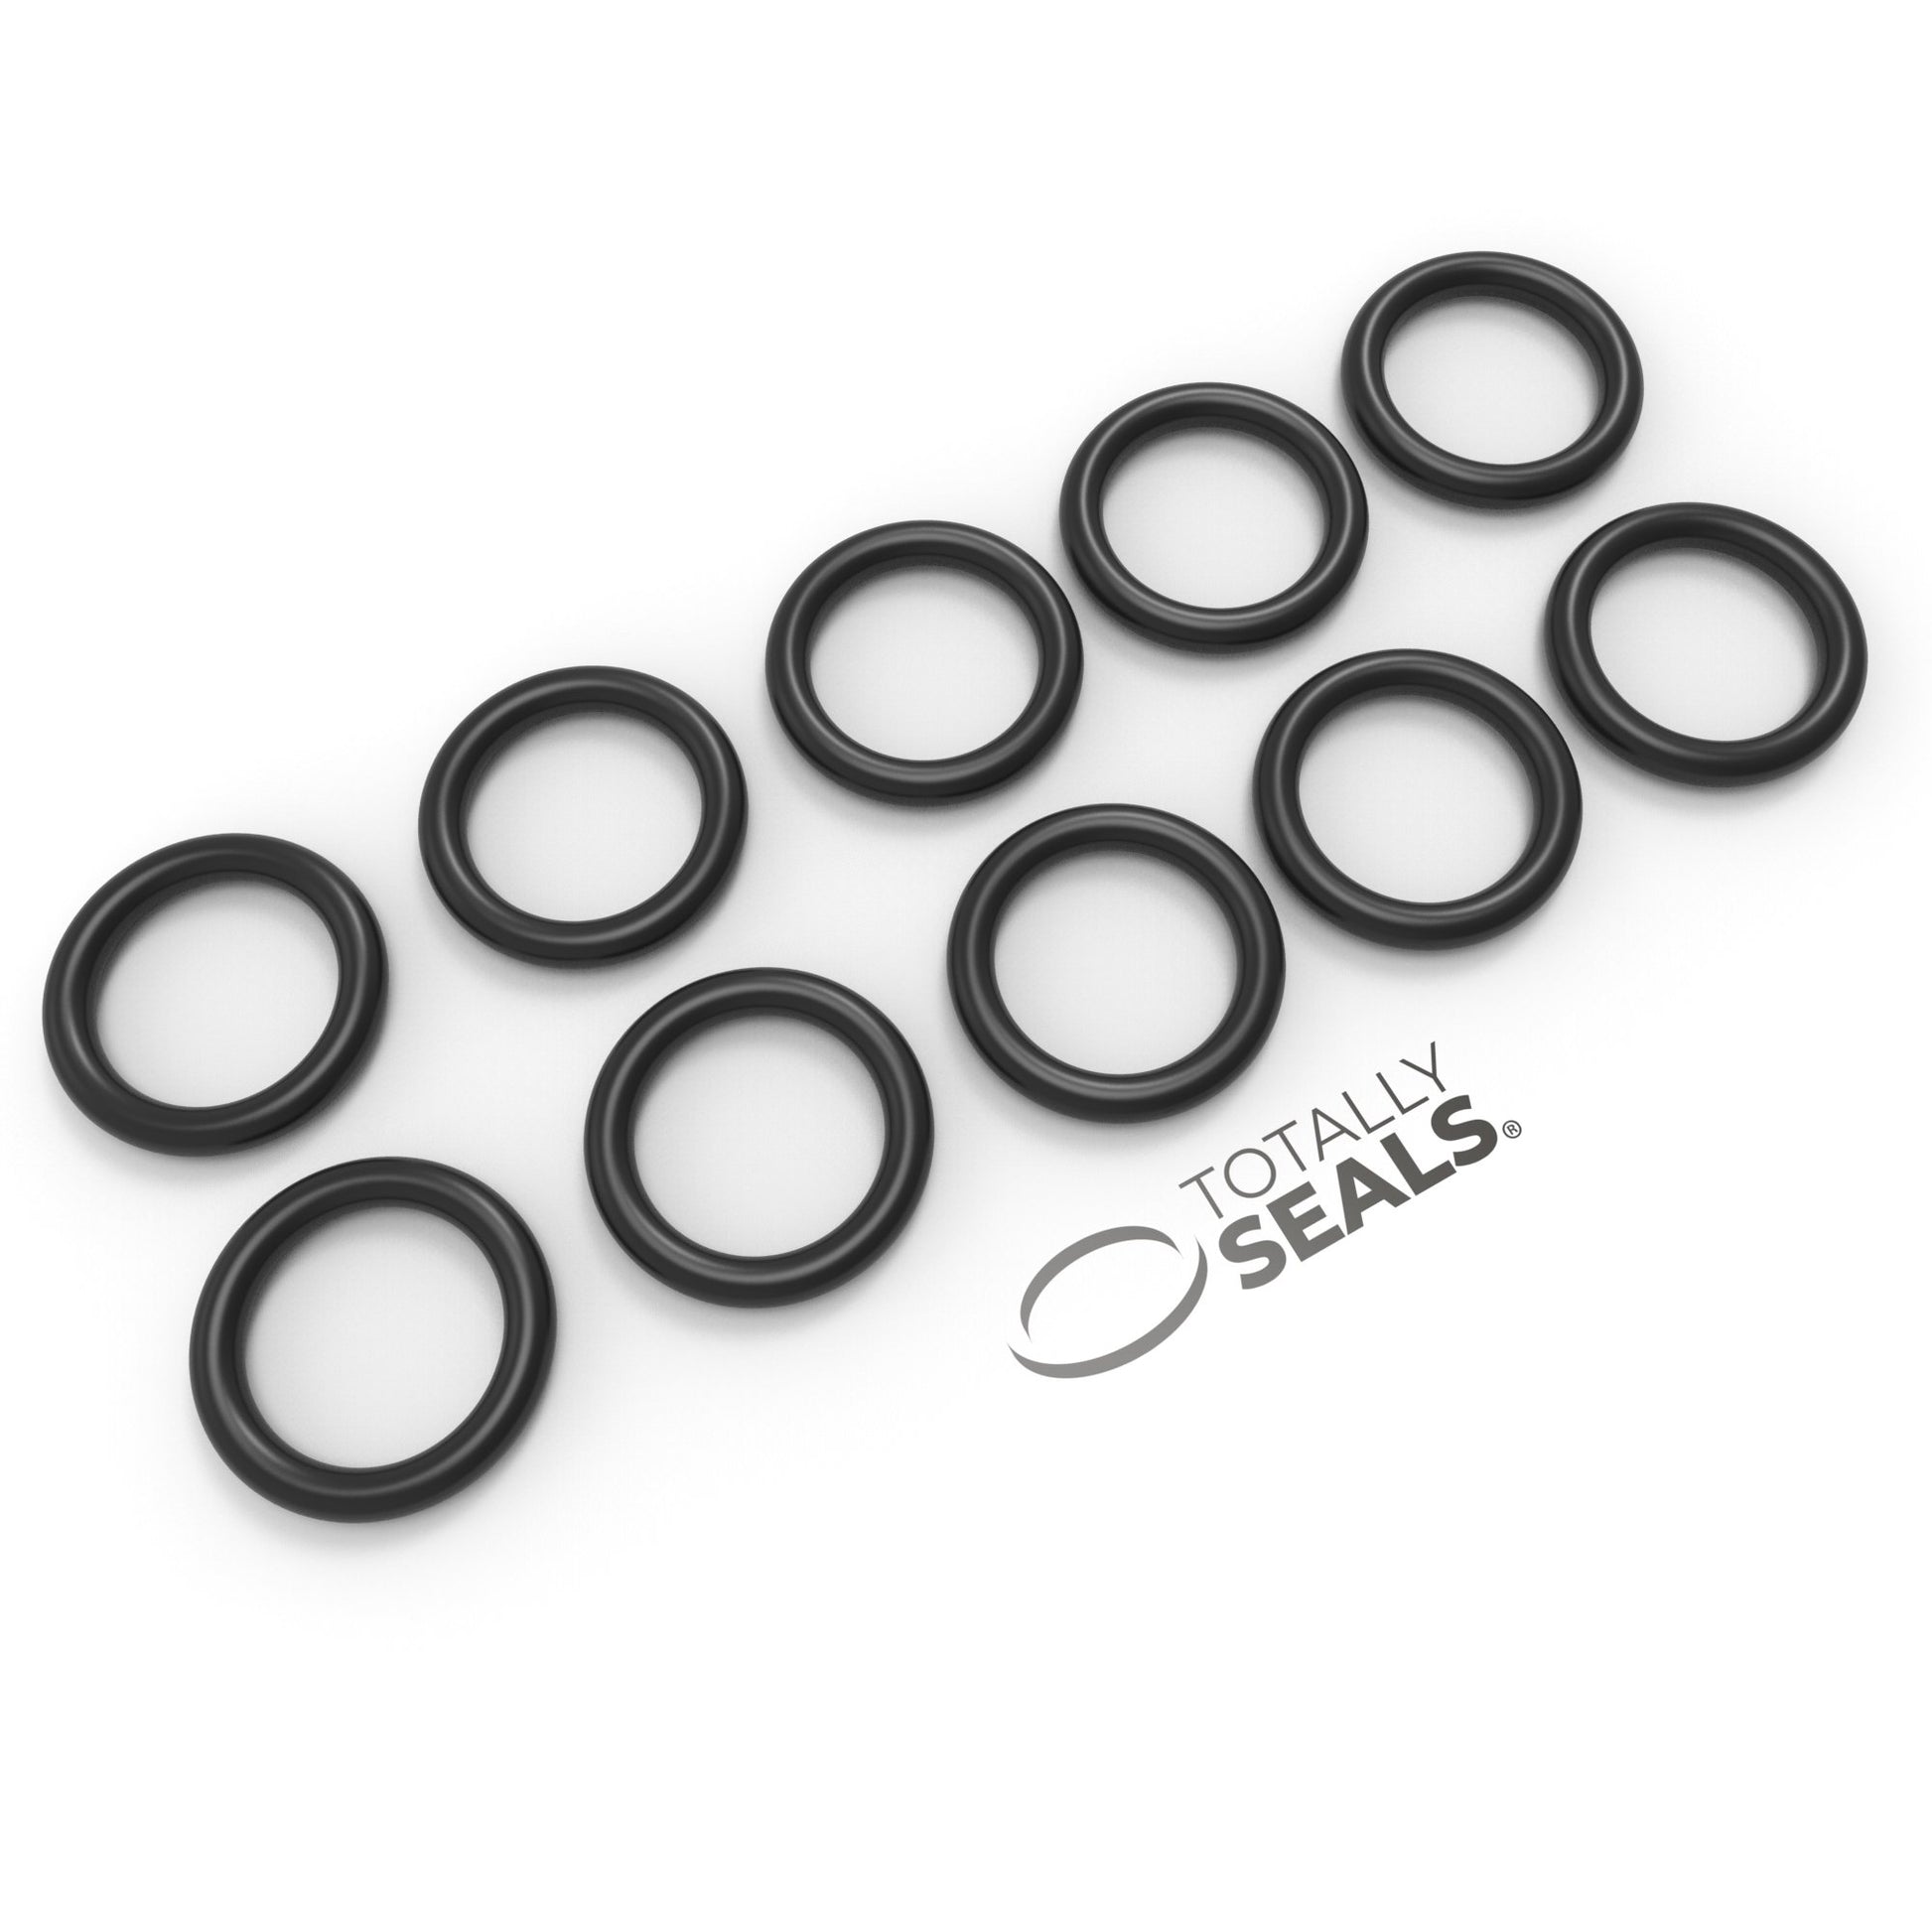 3/16" x 1/16" (BS008) Imperial Nitrile O-Rings - Totally Seals®